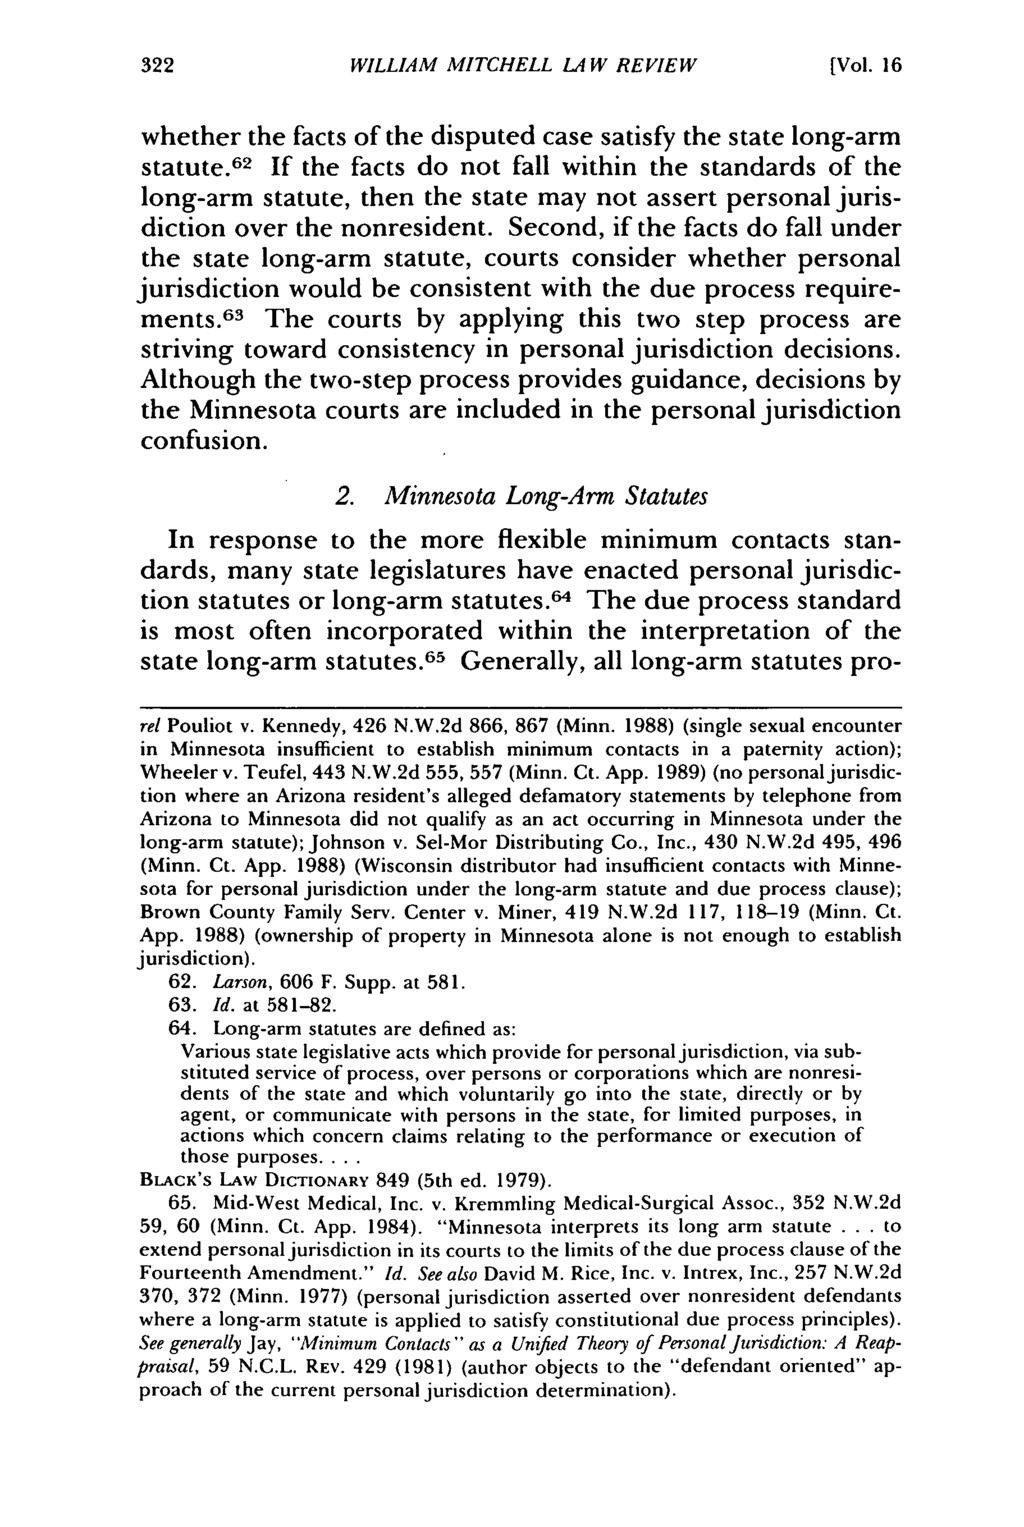 William WILLIAM Mitchell Law MITCHELL Review, Vol. 16, LA Iss. W 1 REVIEW [1990], Art. 7 [Vol. 16 whether the facts of the disputed case satisfy the state long-arm statute.